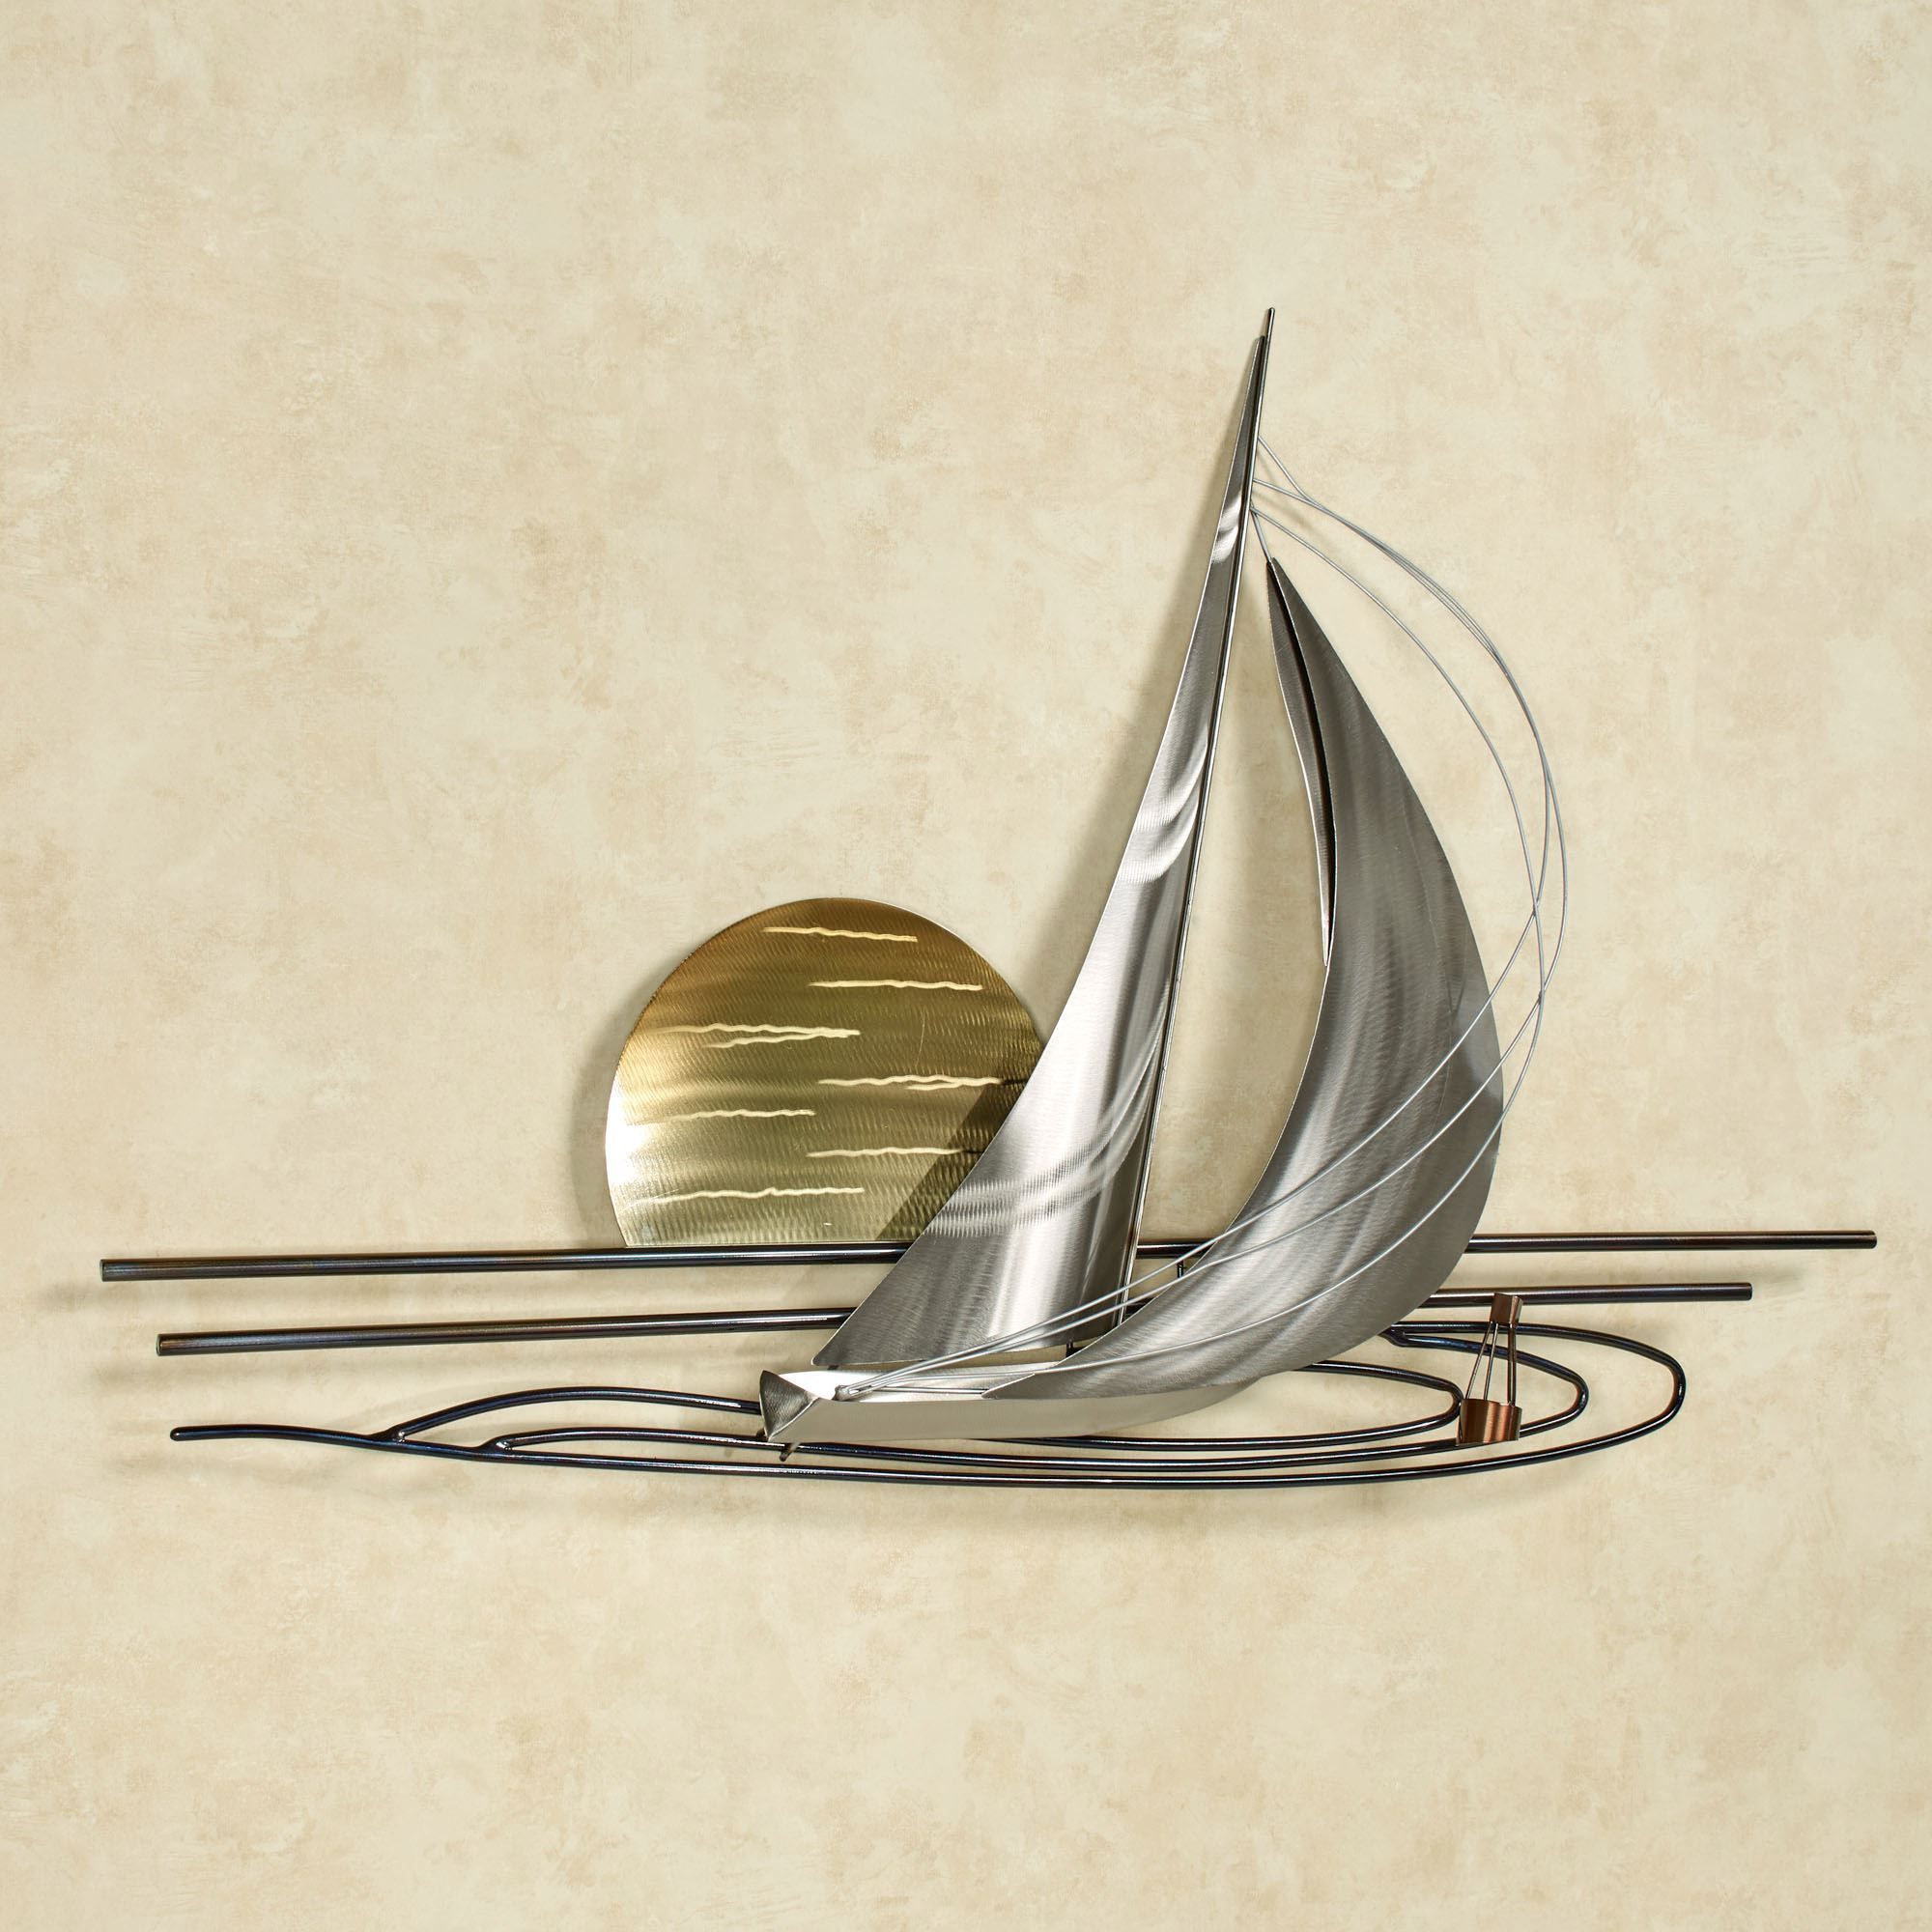 Famous Ocean Metal Wall Art In Sails At Sunset Metal Wall Sculpture (View 11 of 15)